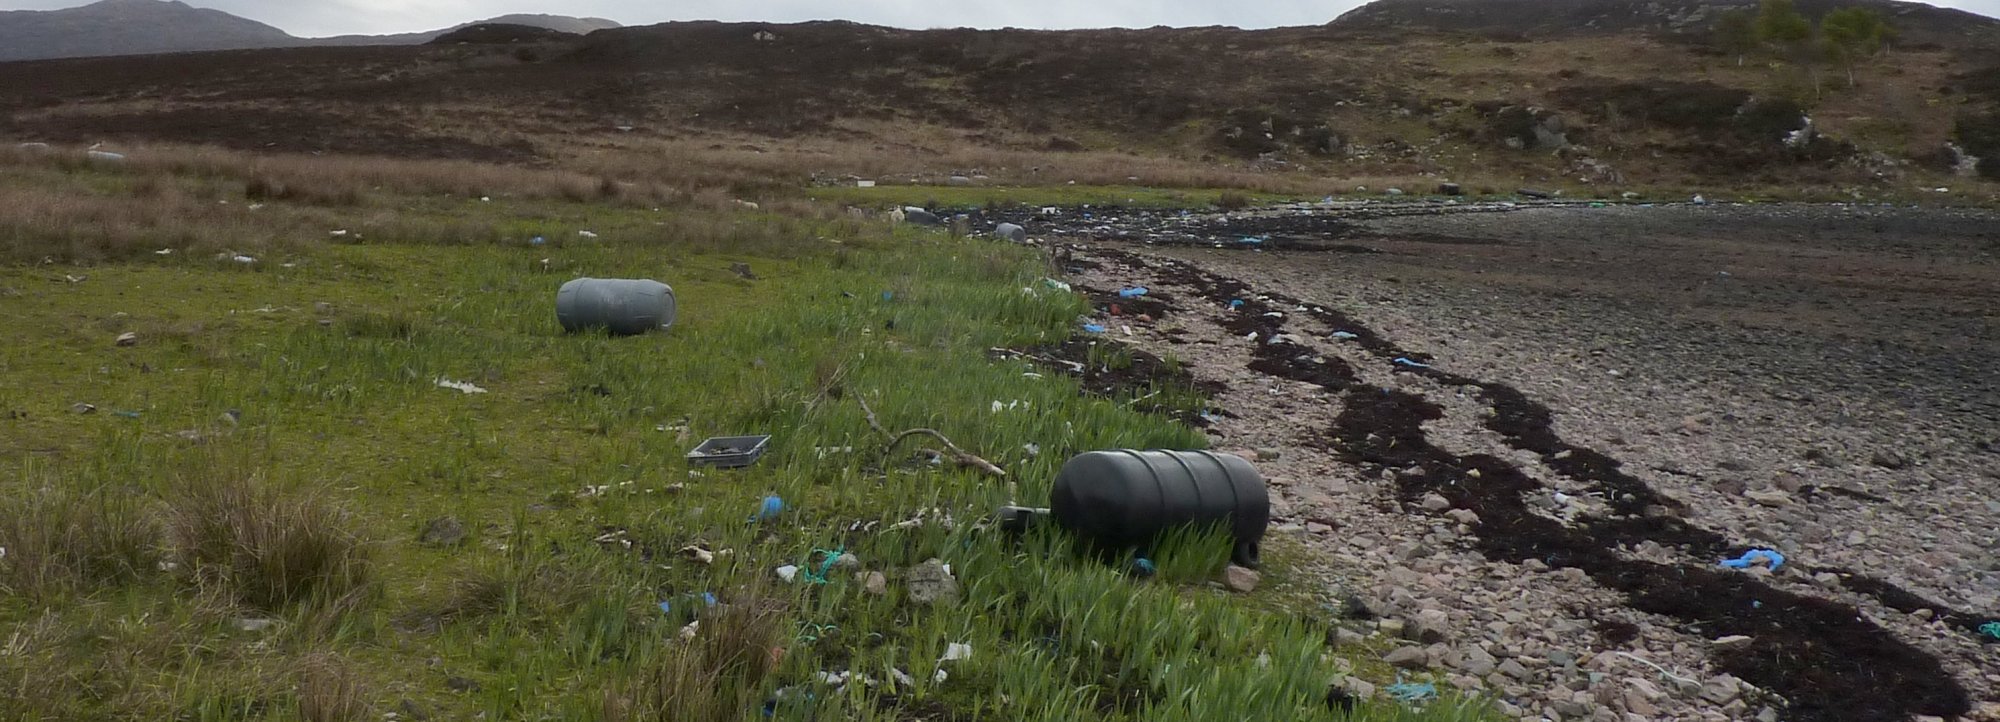 More litter and more drums as I approach the head of Loch Eishort